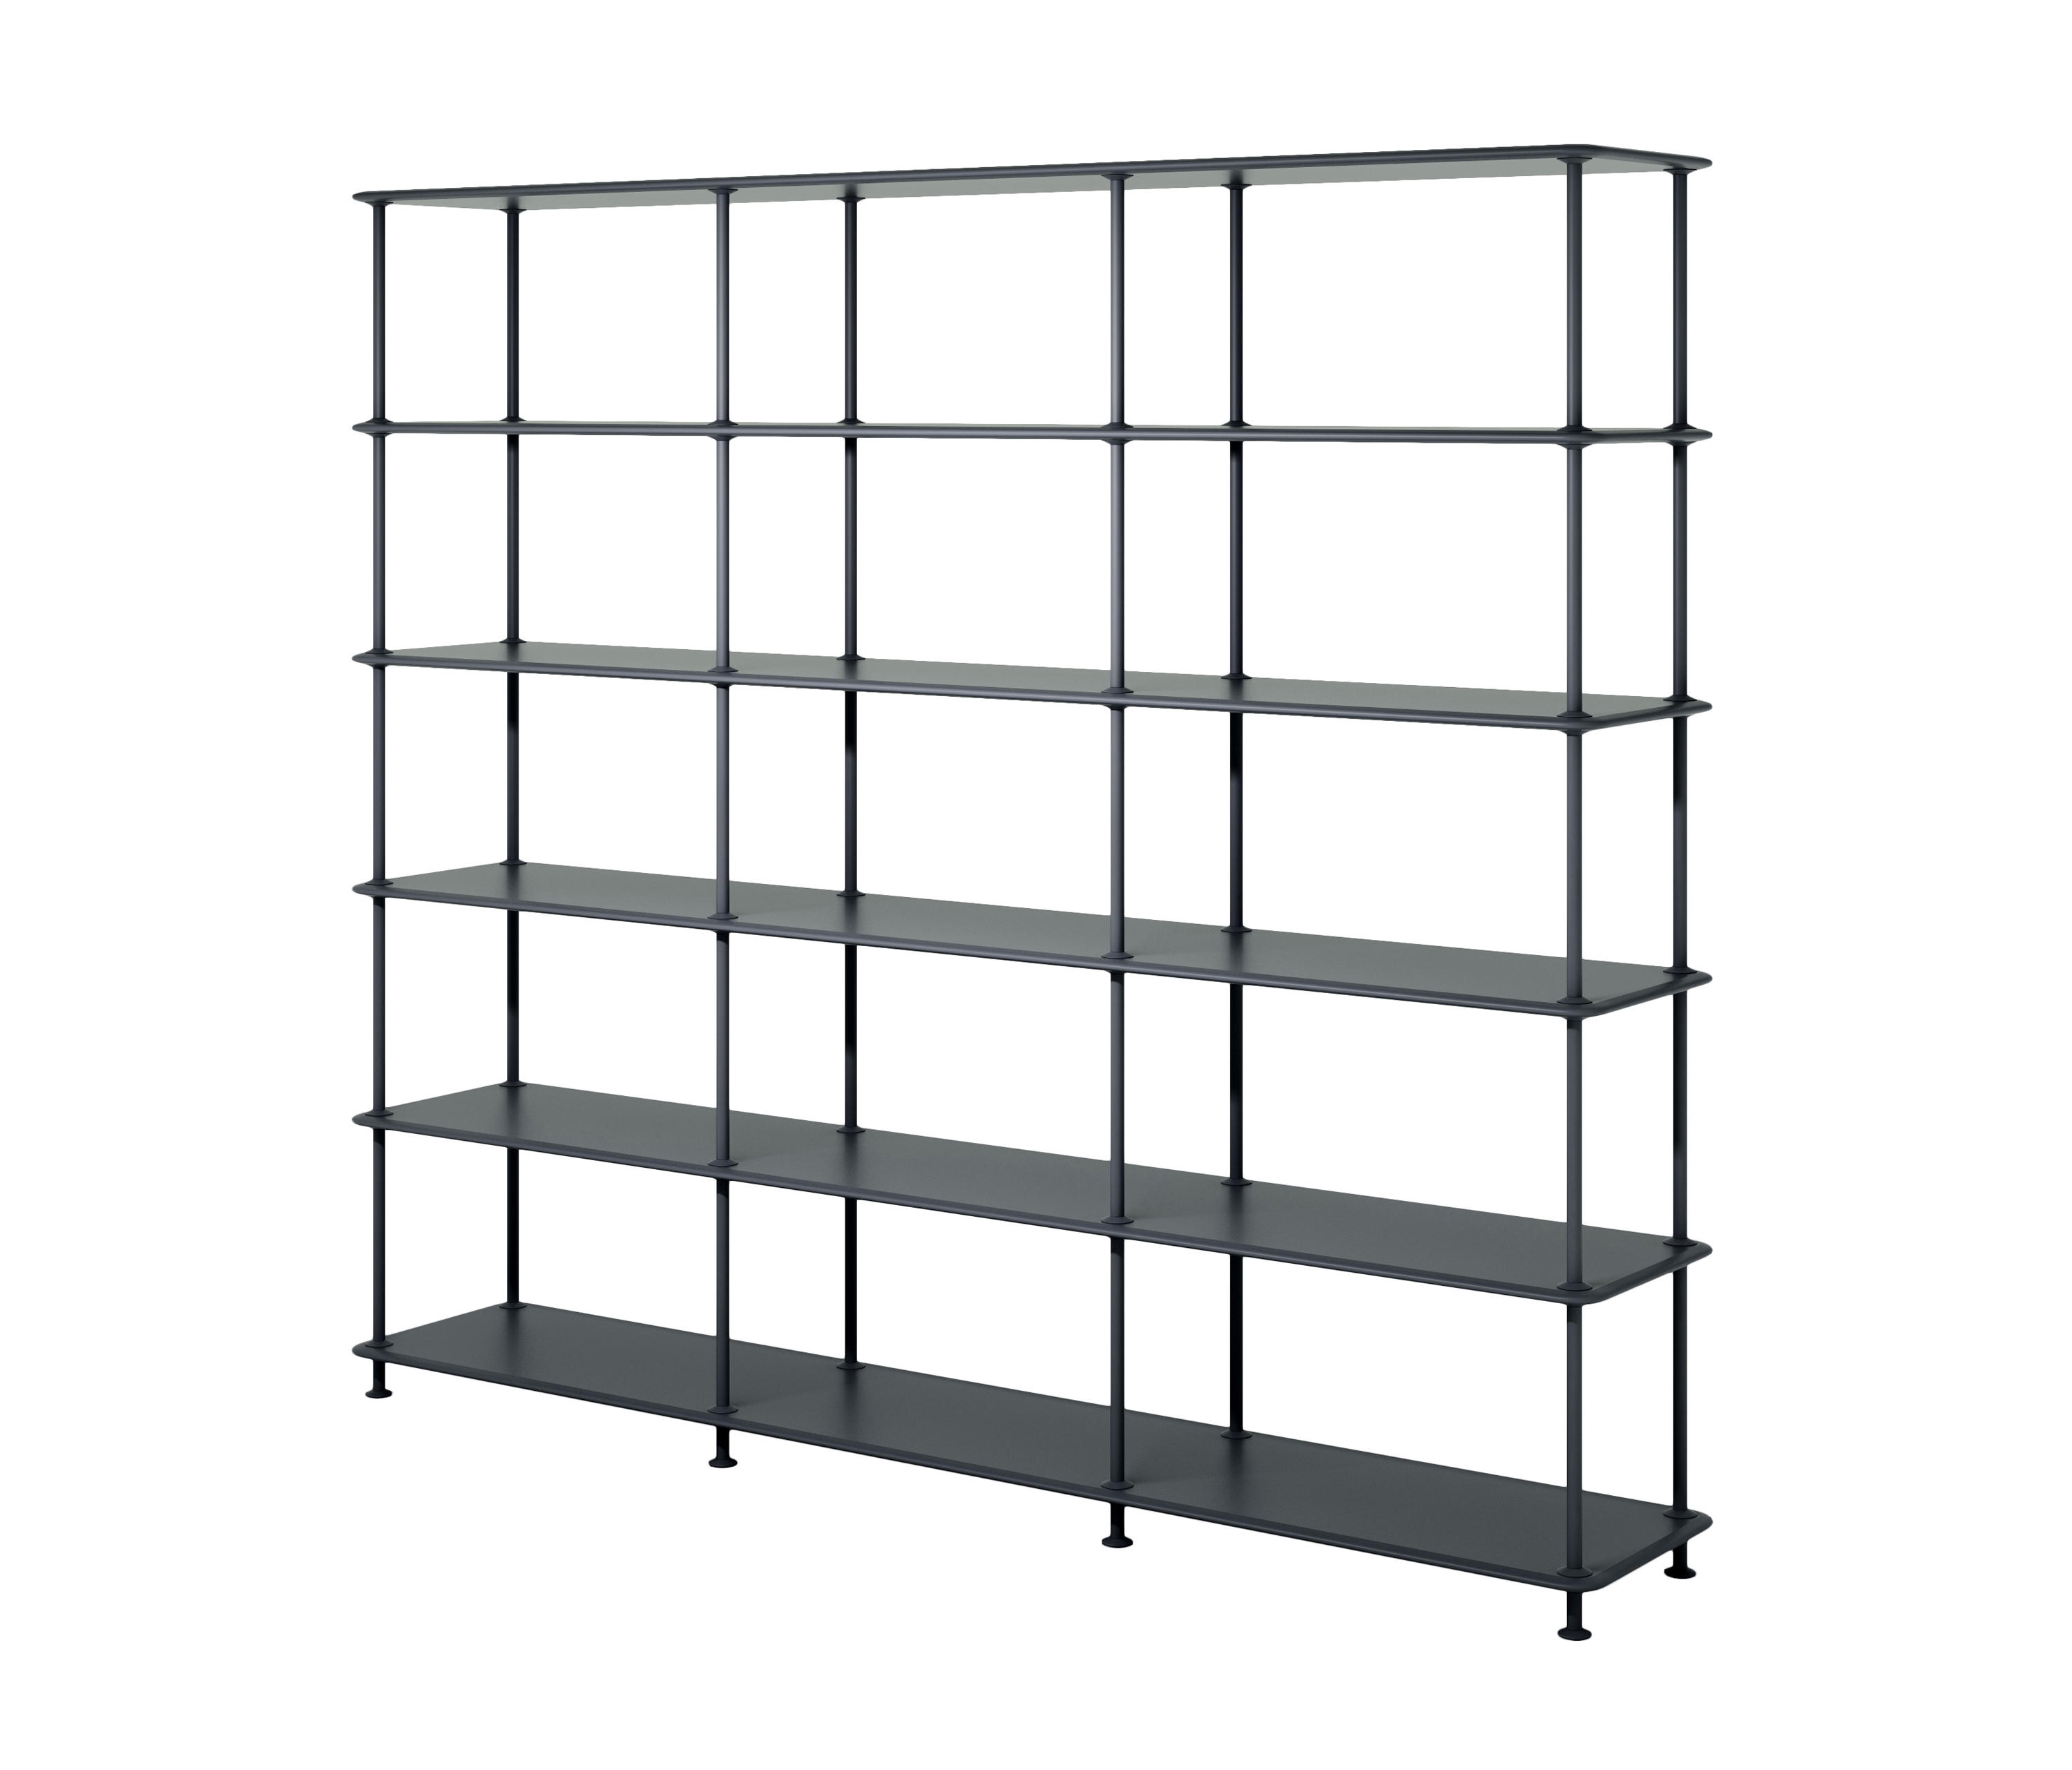 Montana Free (555000) | Large shelf and room divider | Architonic